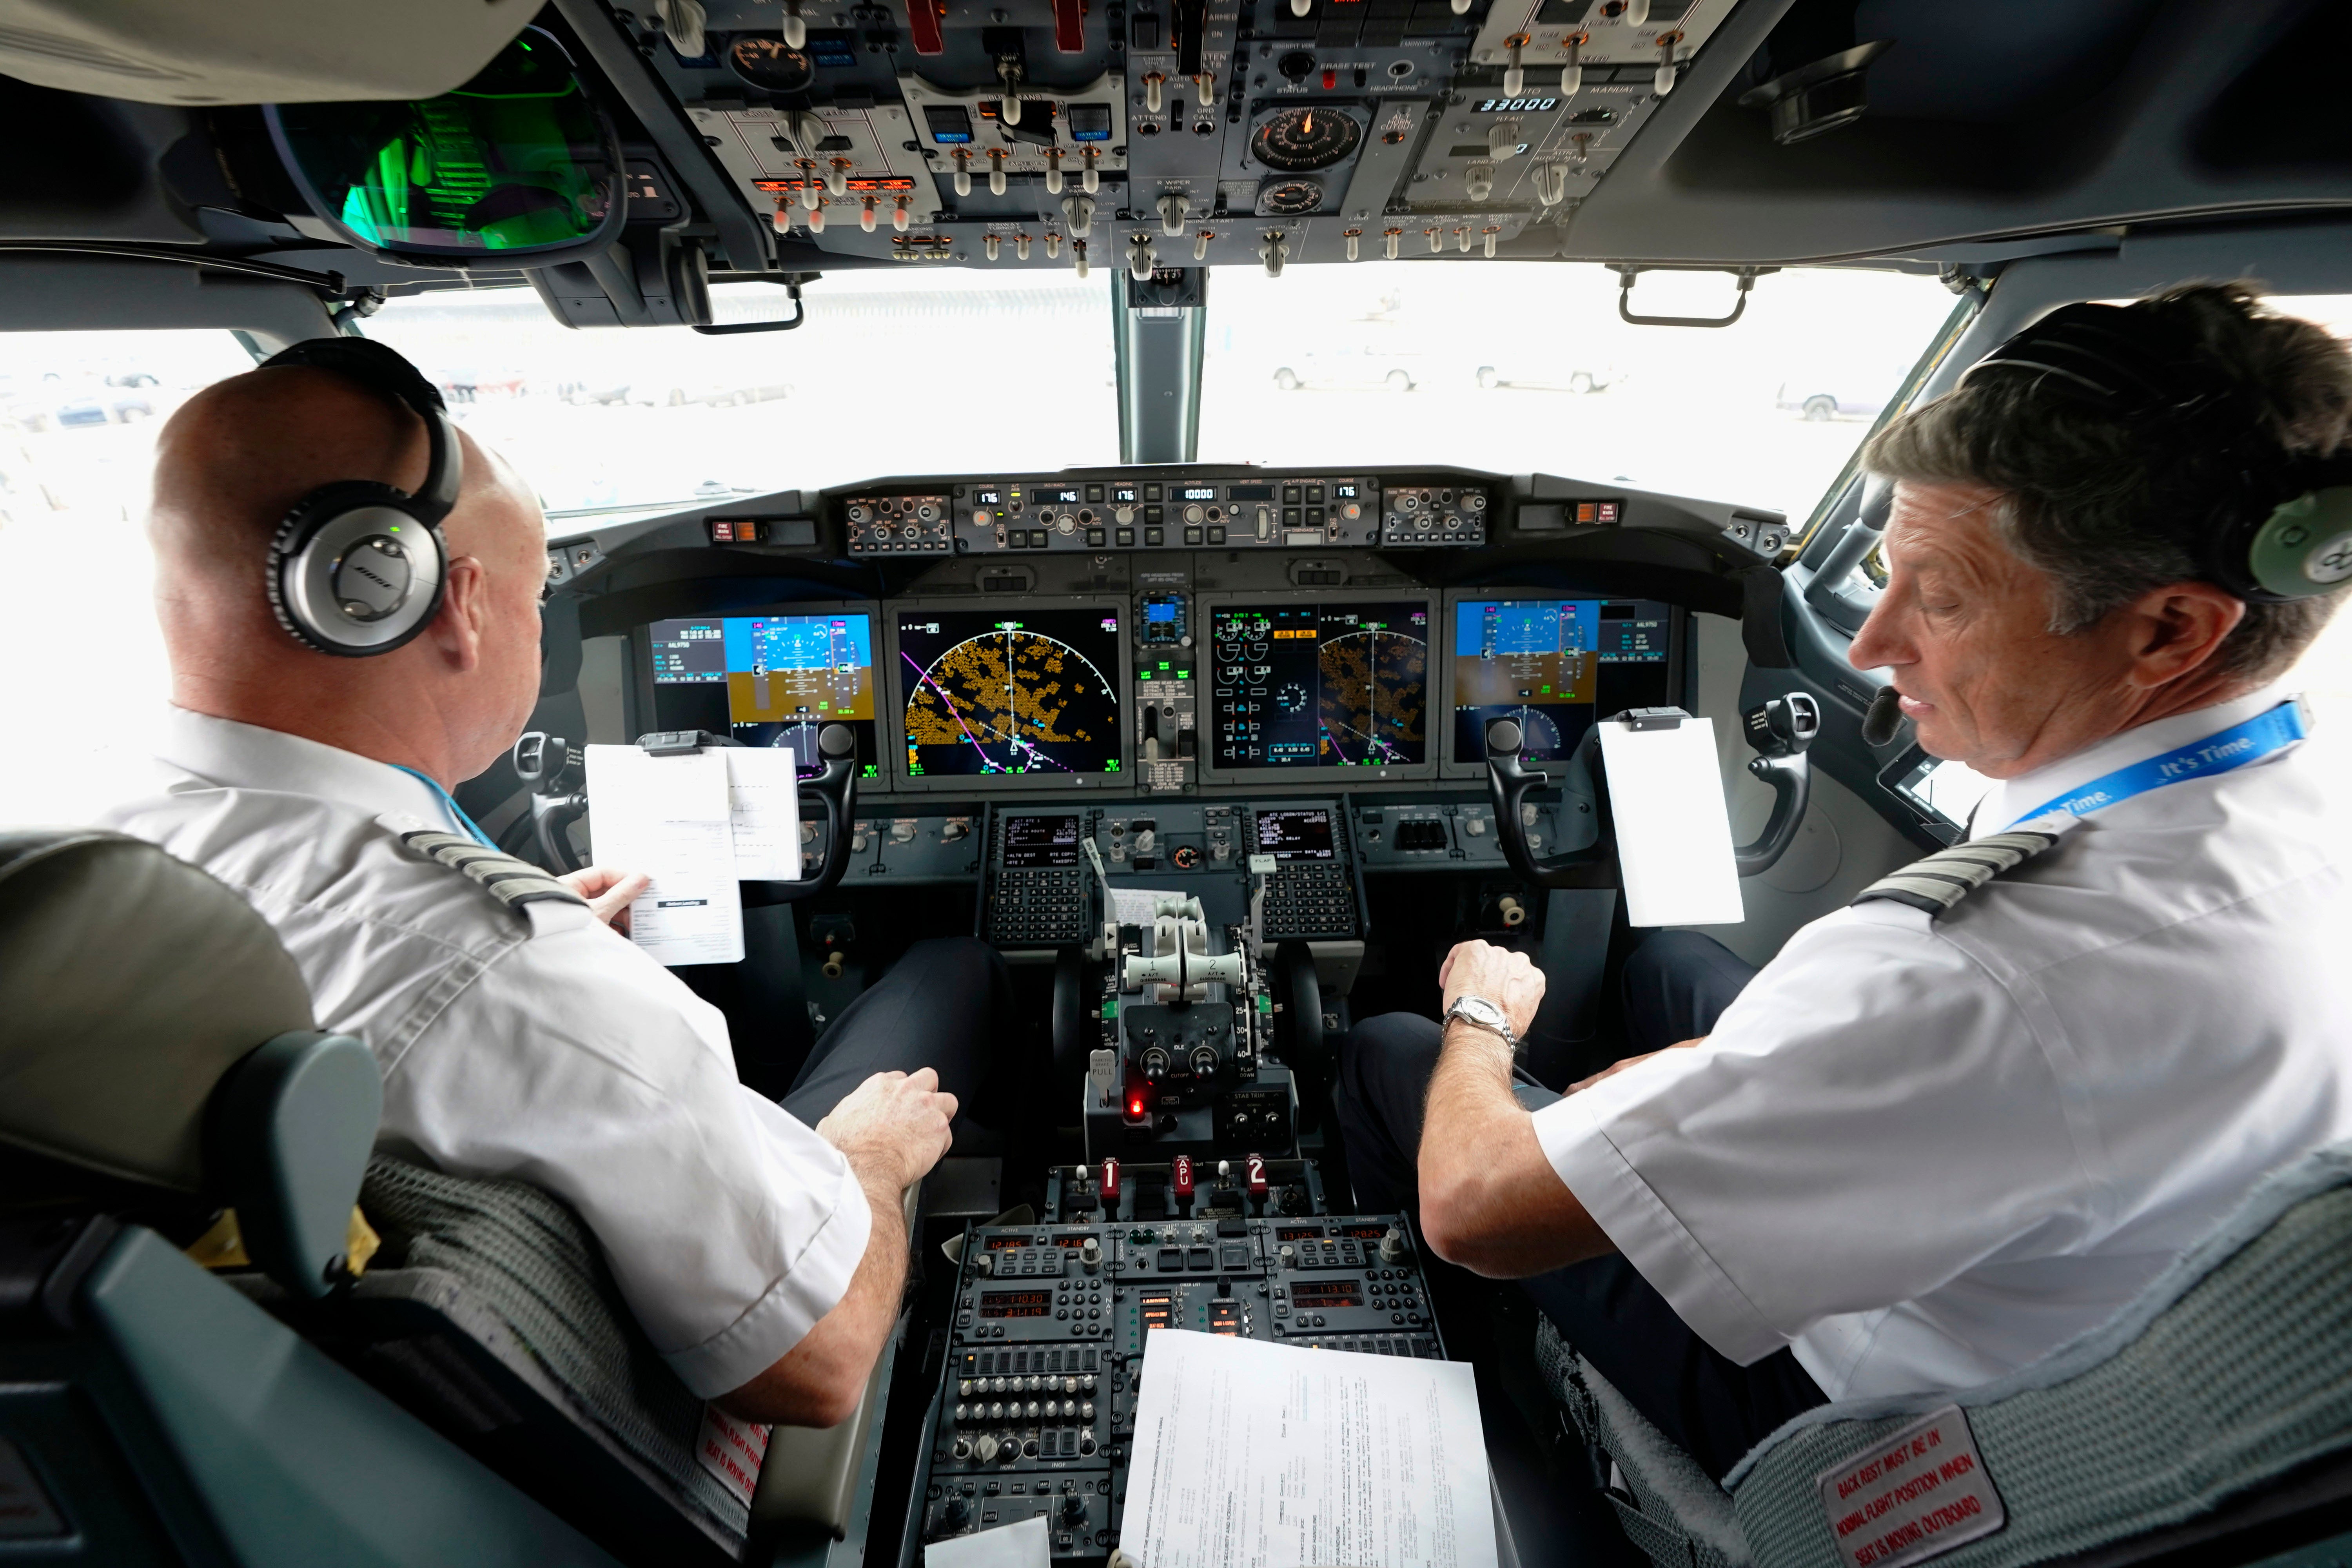 New airline planes will be required to have secondary barriers to the cockpit to protect pilots The Independent pic